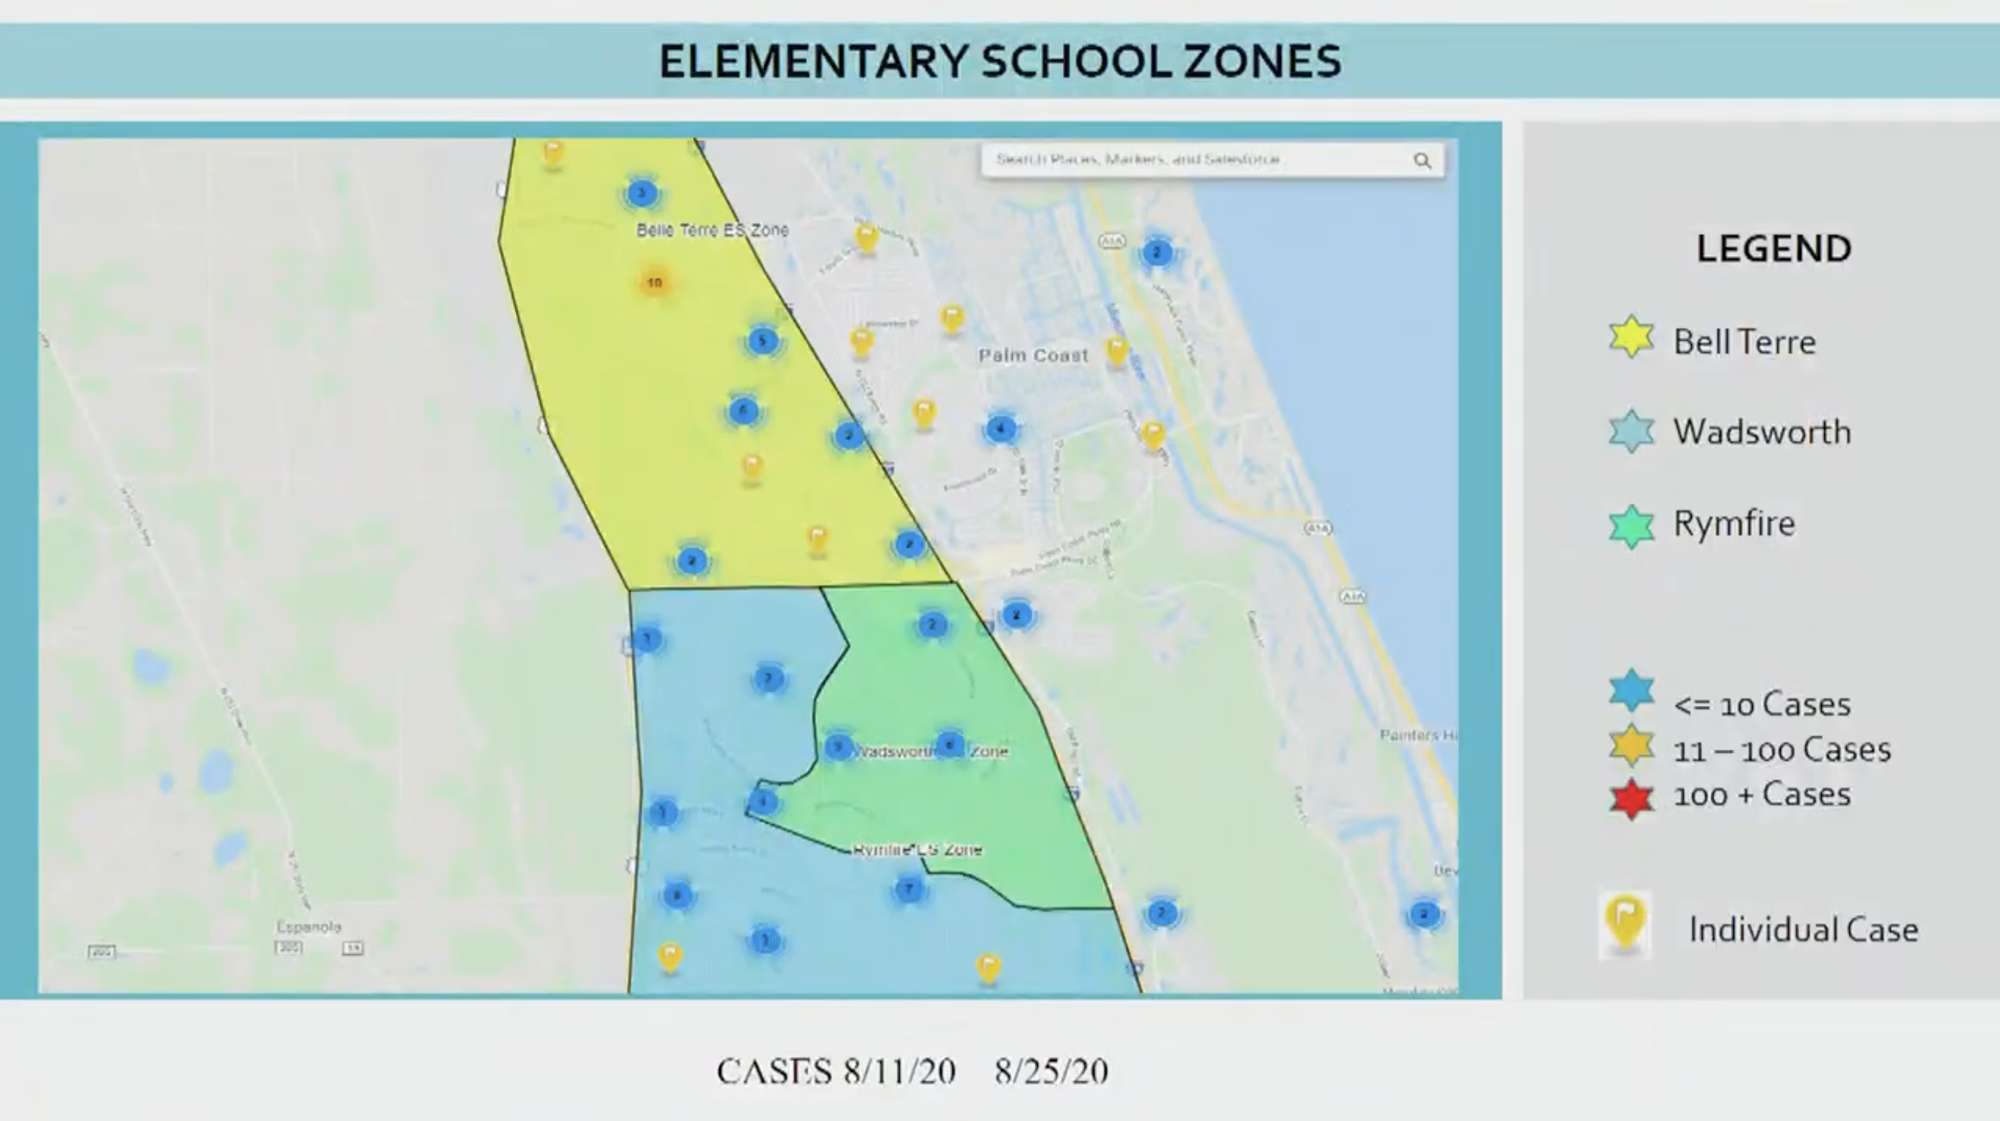 Known COVID-19 cases from individual testing are overlain on a map showing elementary school boundaries. Image courtesy of the city of Palm Coast